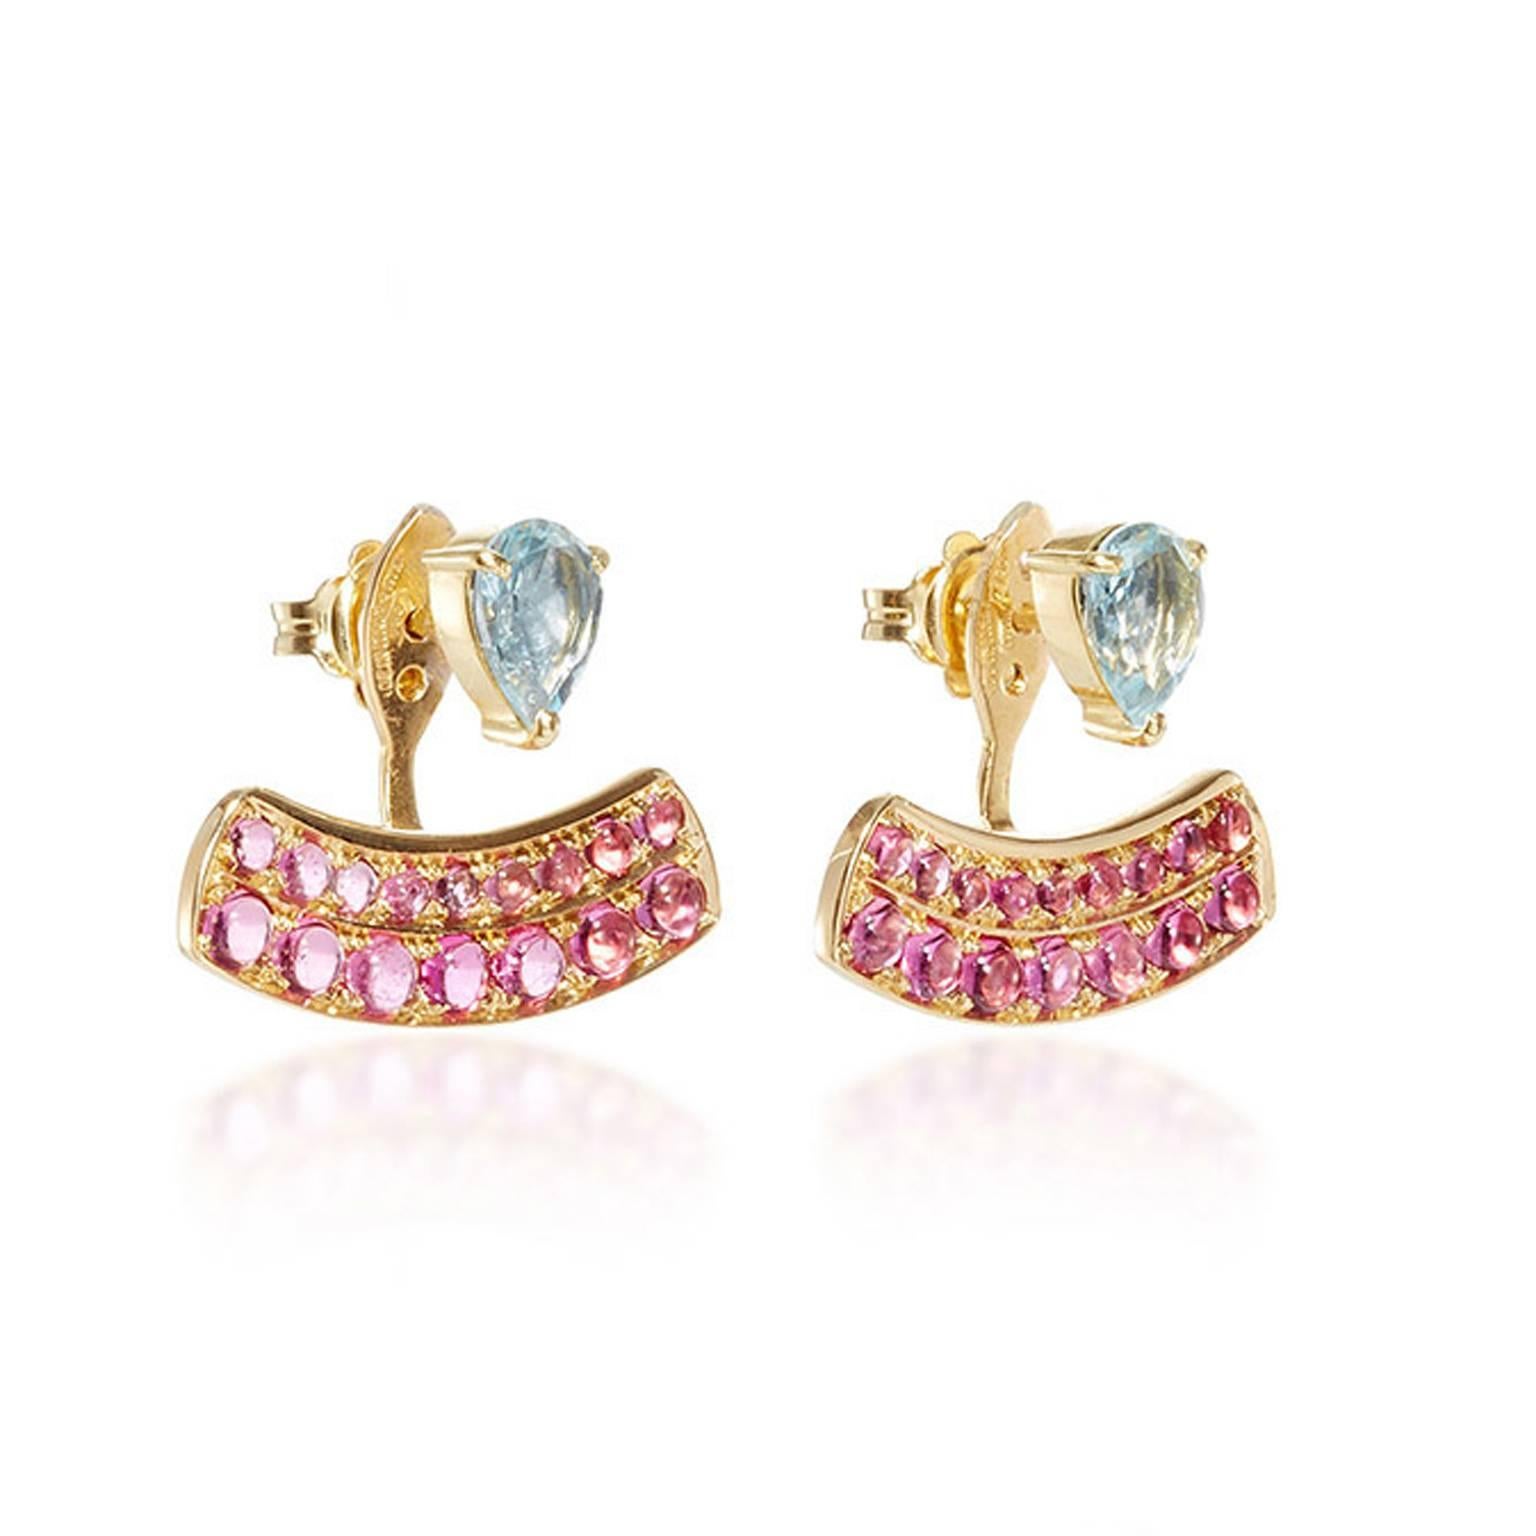 These DUBINI earrings from the 'Theodora' collection feature aquamarine drops with rubellite cabochons set in 18K yellow gold. 

Handmade in Rome, they are punctuated with three holes for an adjustable fit. Can be worn as a single stud or together